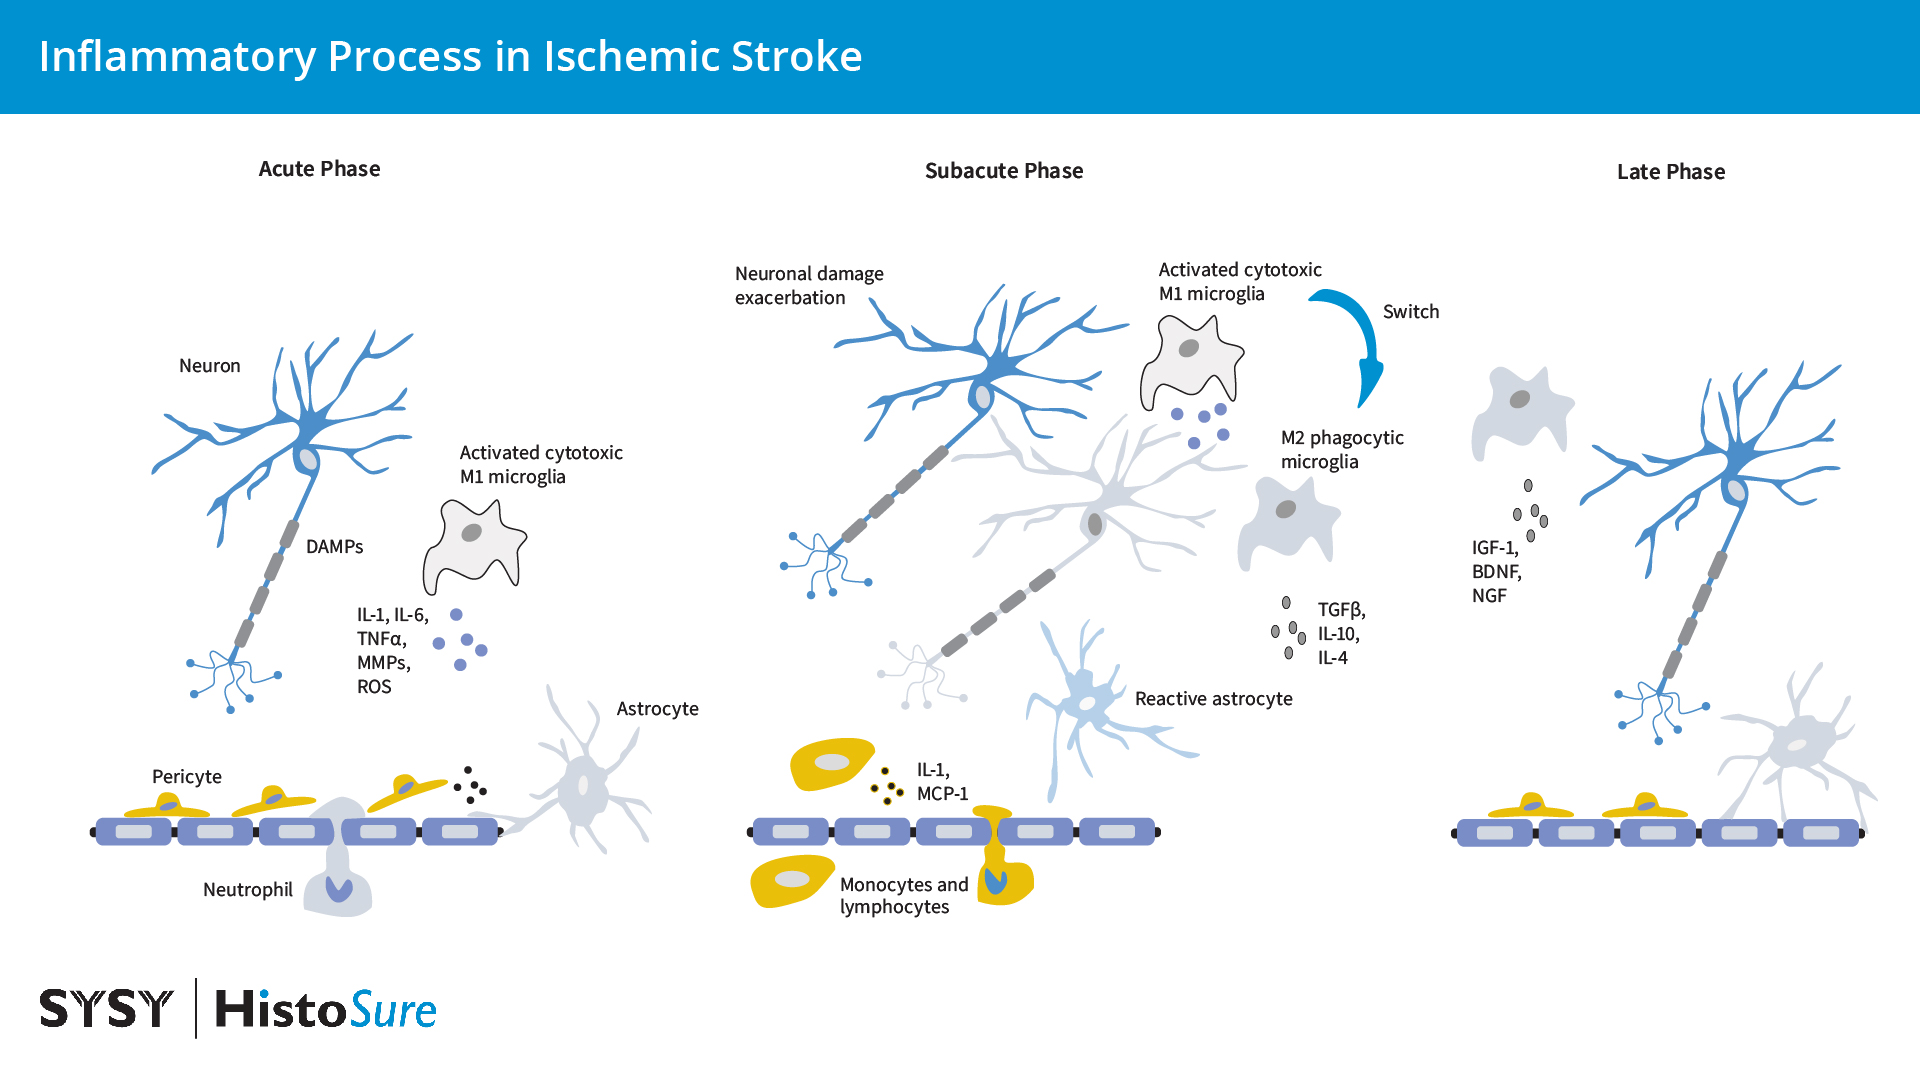 Visual graphic of a inflammatory process in ischemic stroke adapted from Jurcau and Simion